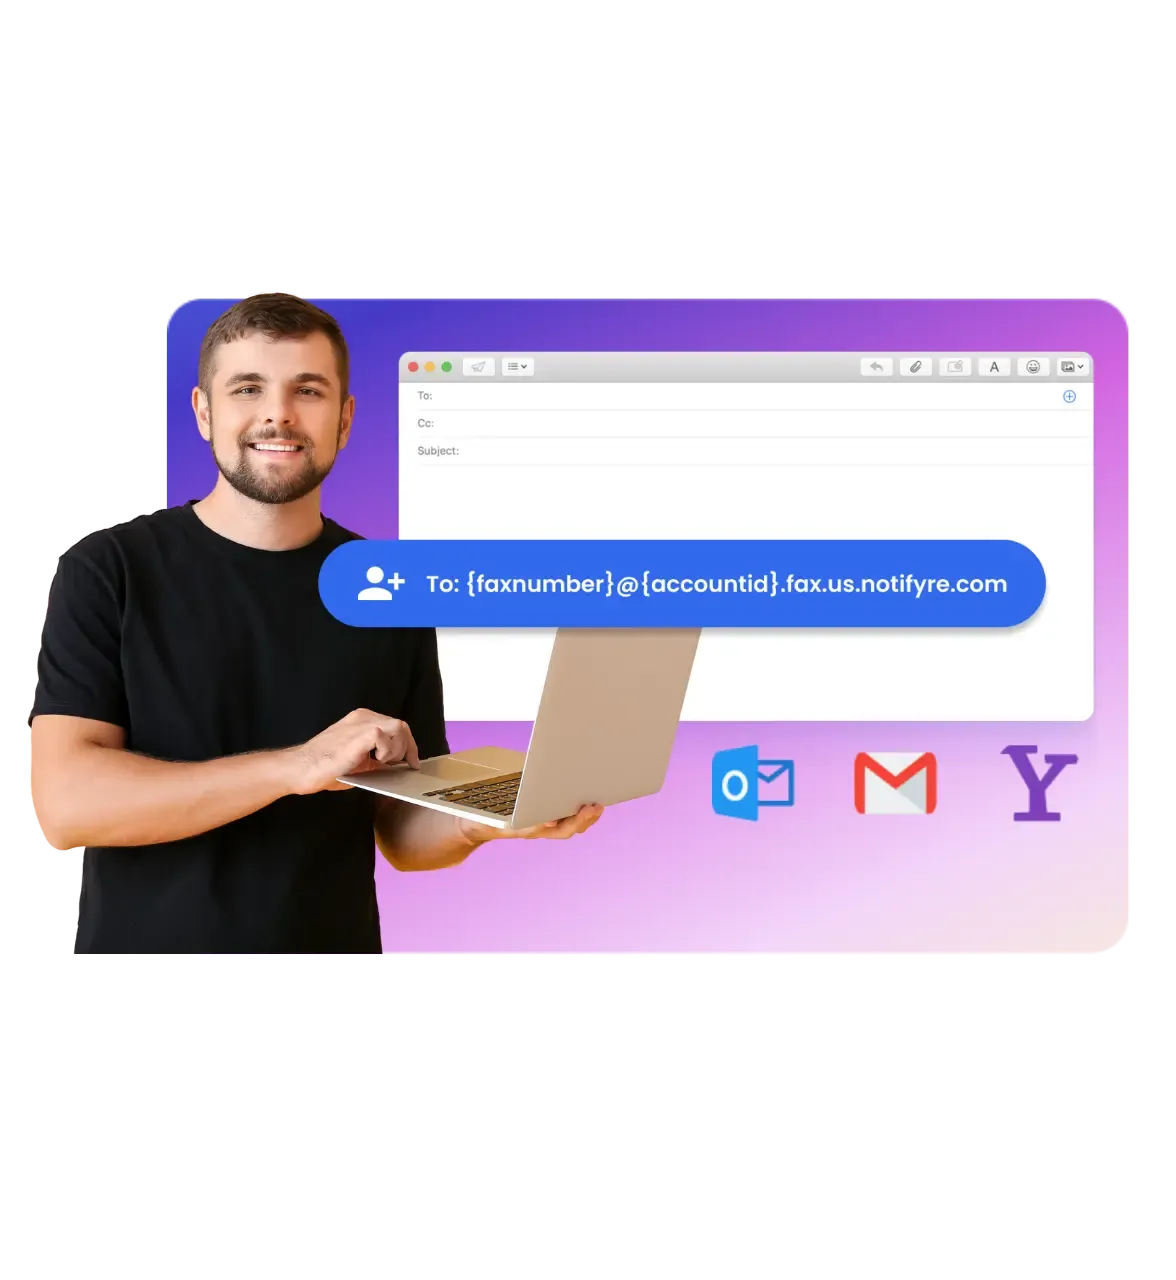 Smiling man holding a laptop with an email composing window in the background. Below, there are icons for Outlook, Gmail, and Yahoo Mail. The background has a purple and pink gradient.